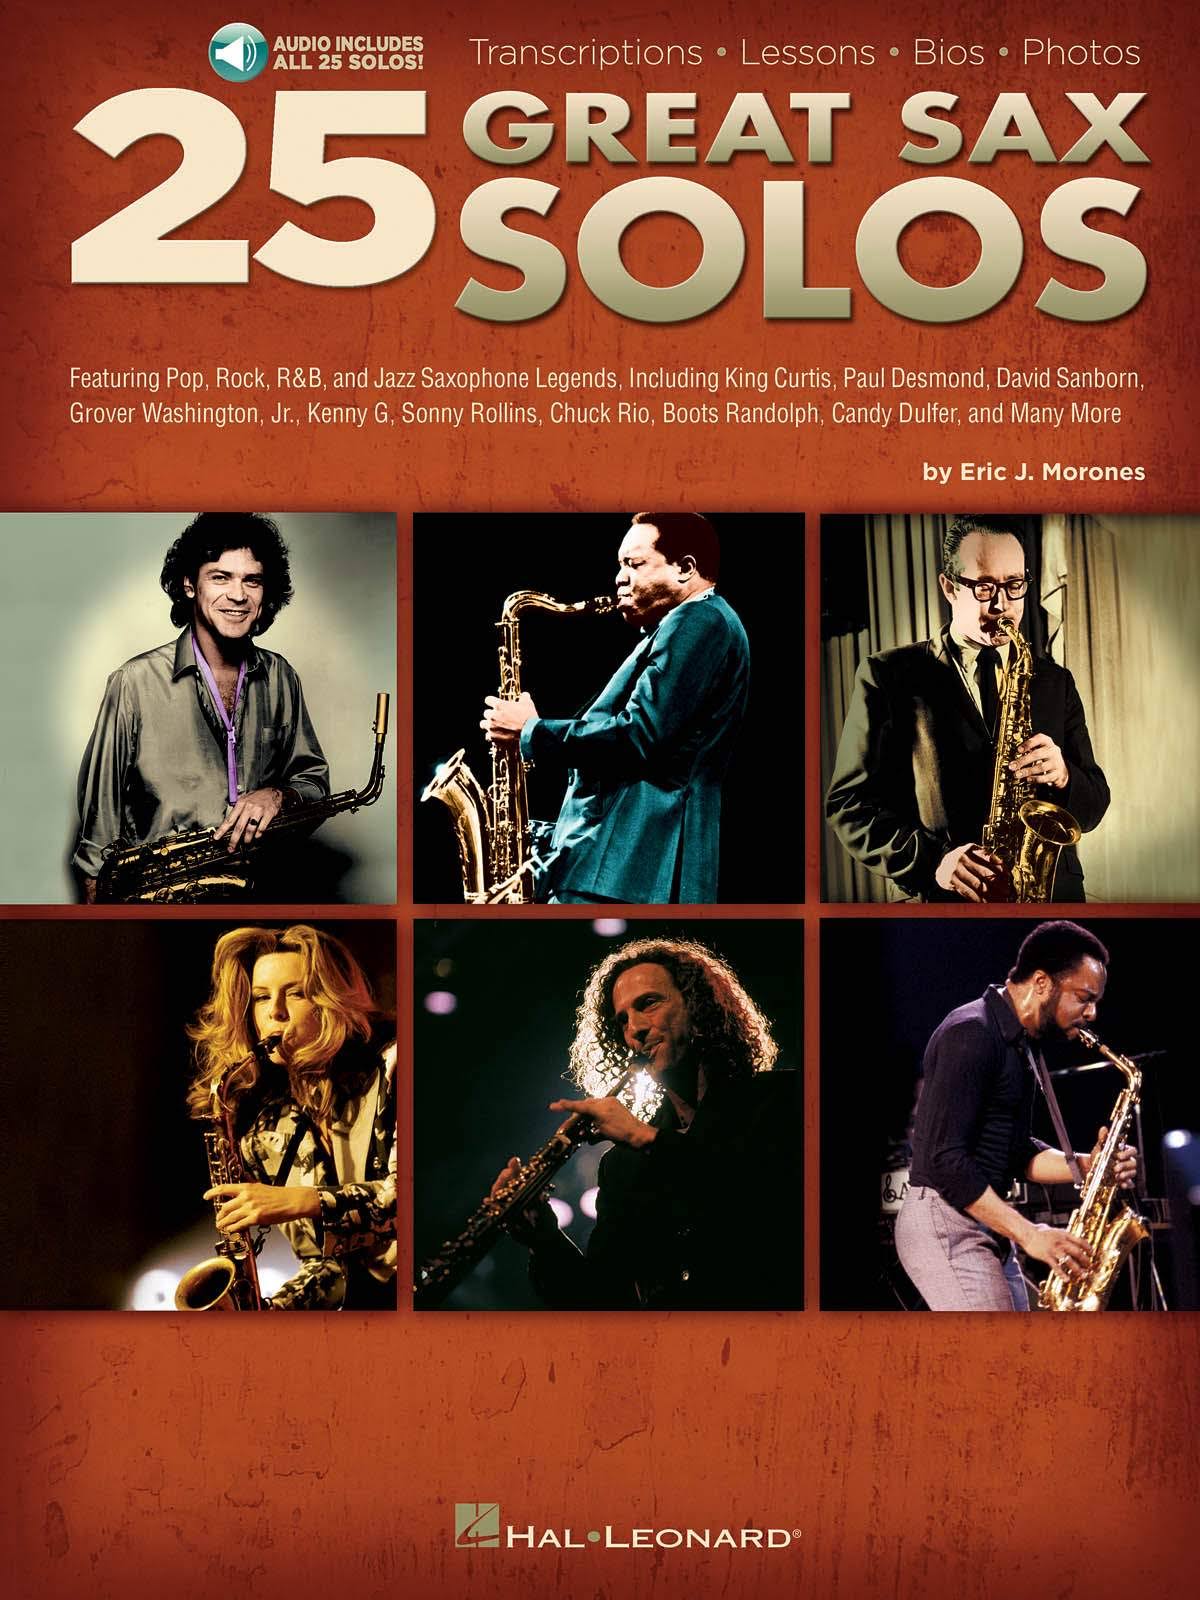 25 Great Sax Solos - Sheet Music